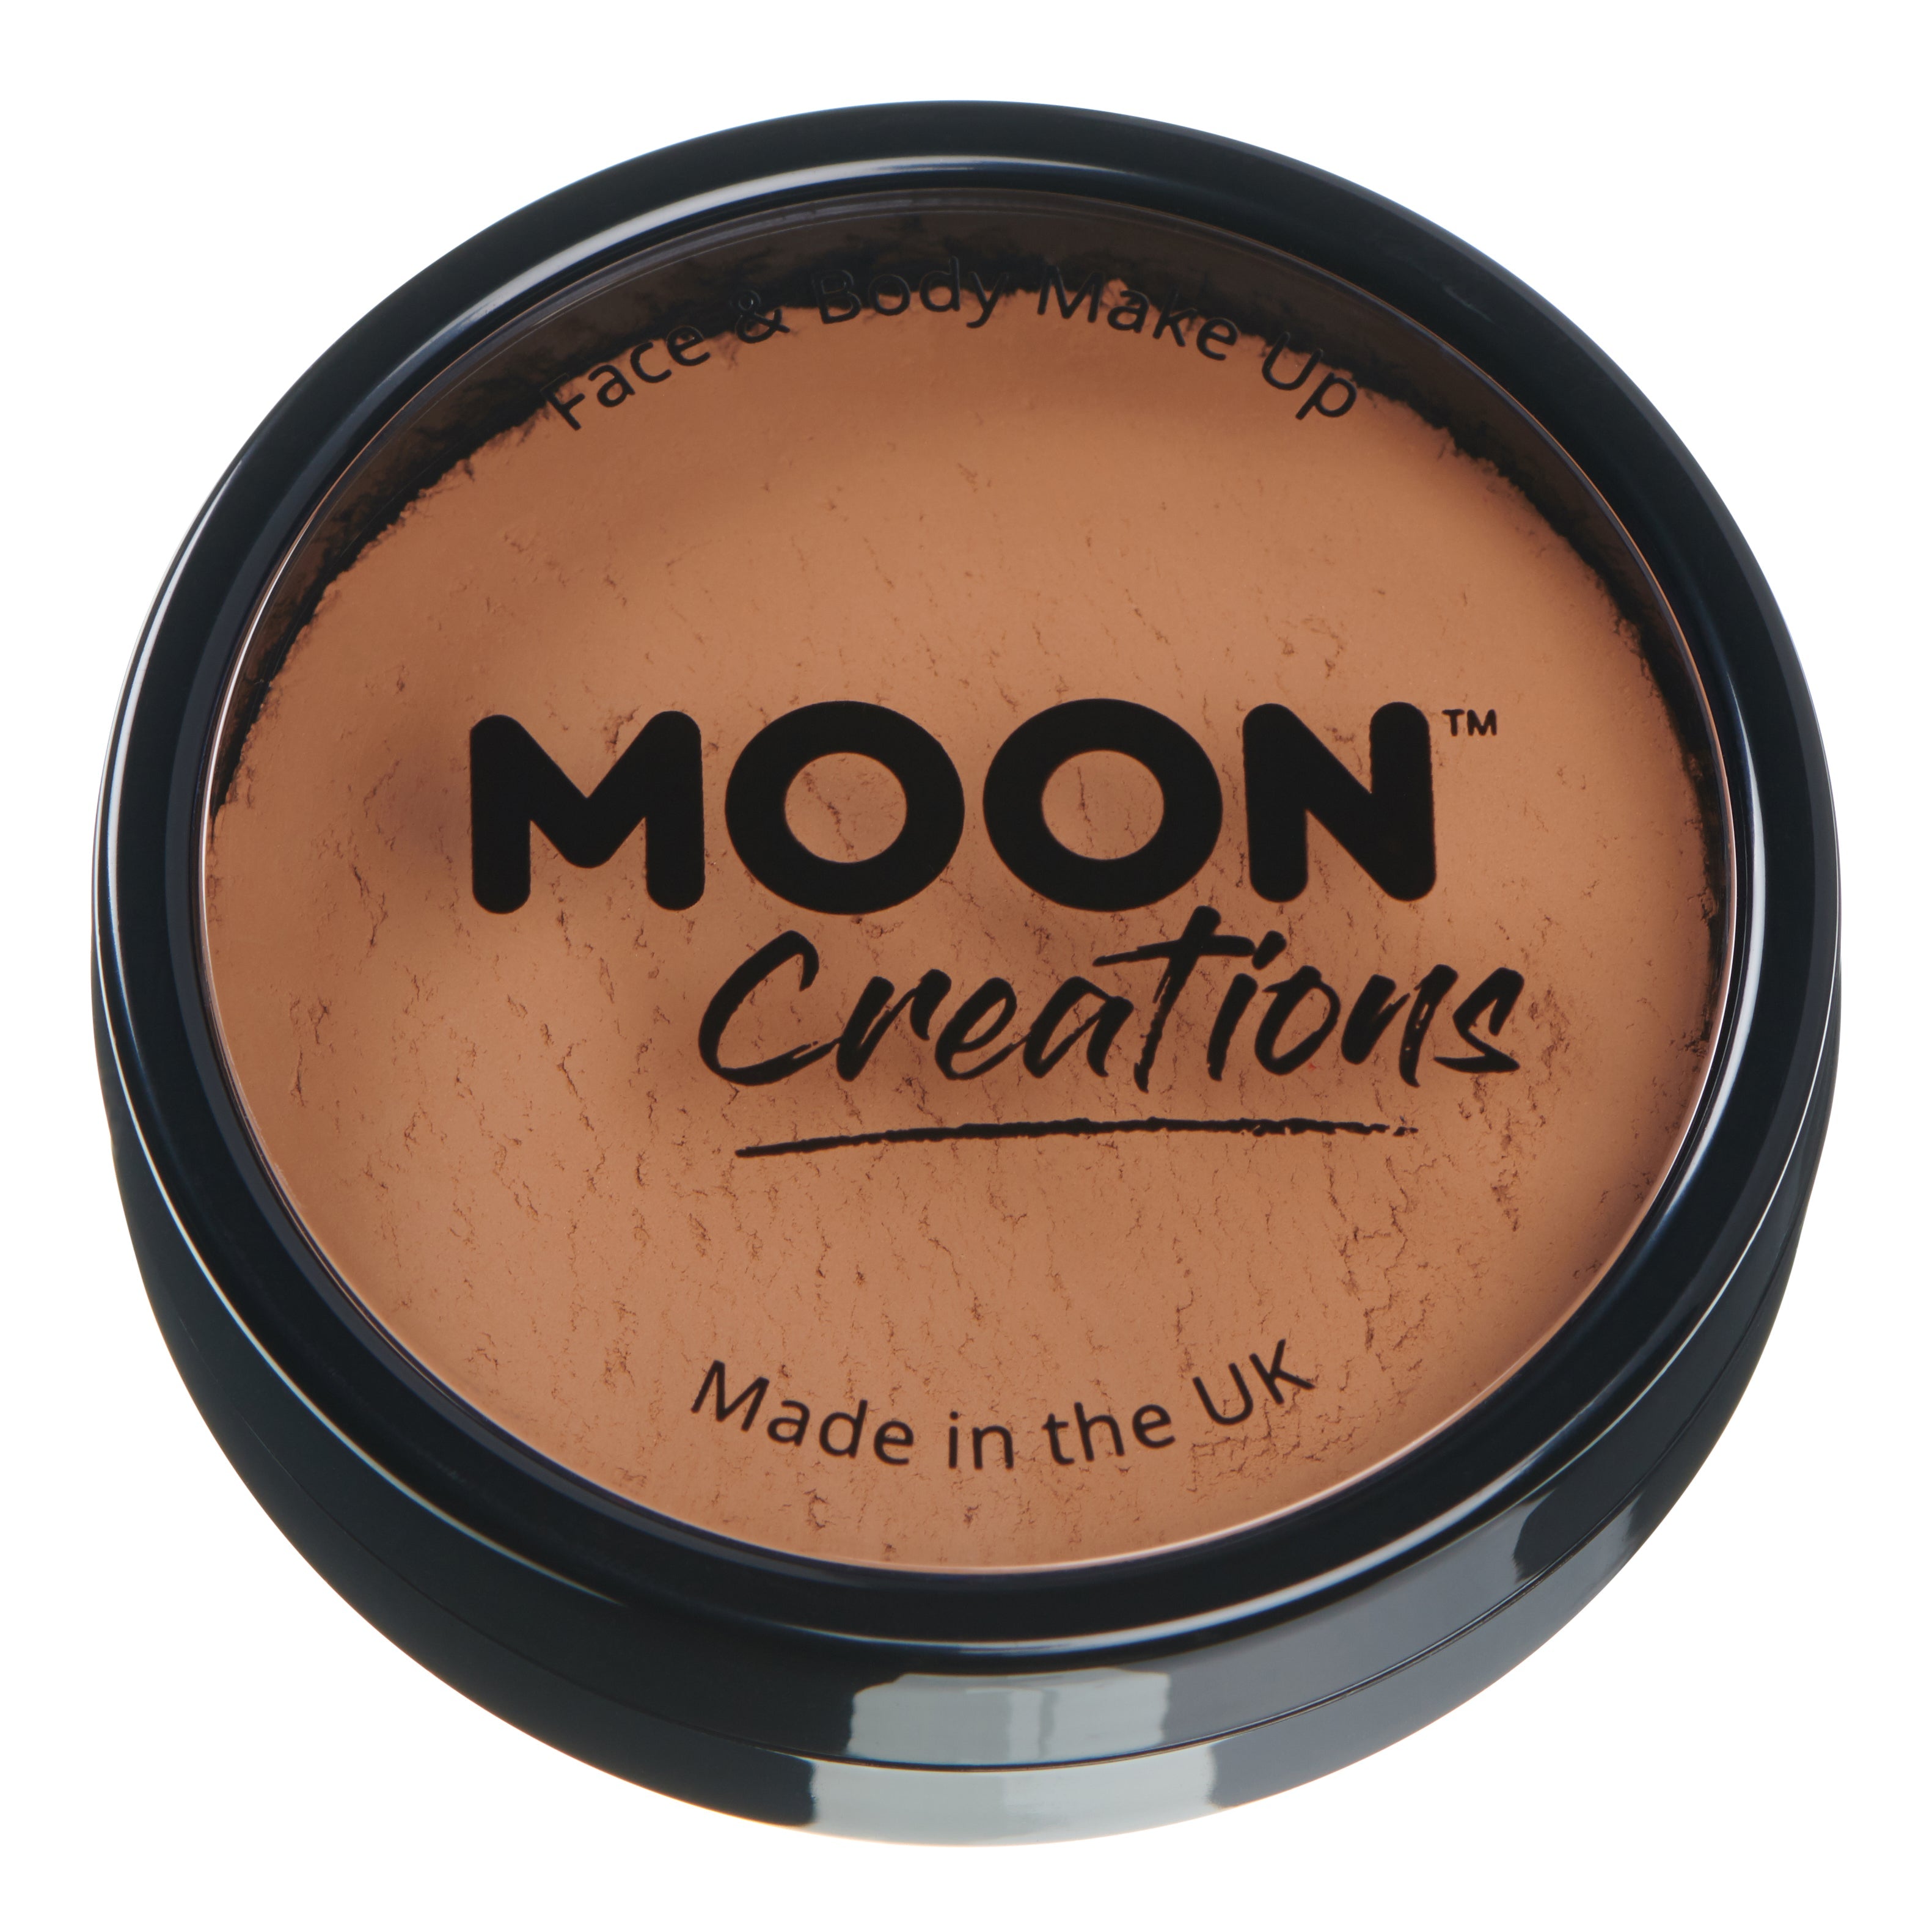 Light Brown - Pro Professional Face Paint, 36g. Cosmetically certified, FDA & Health Canada compliant, cruelty free and vegan.